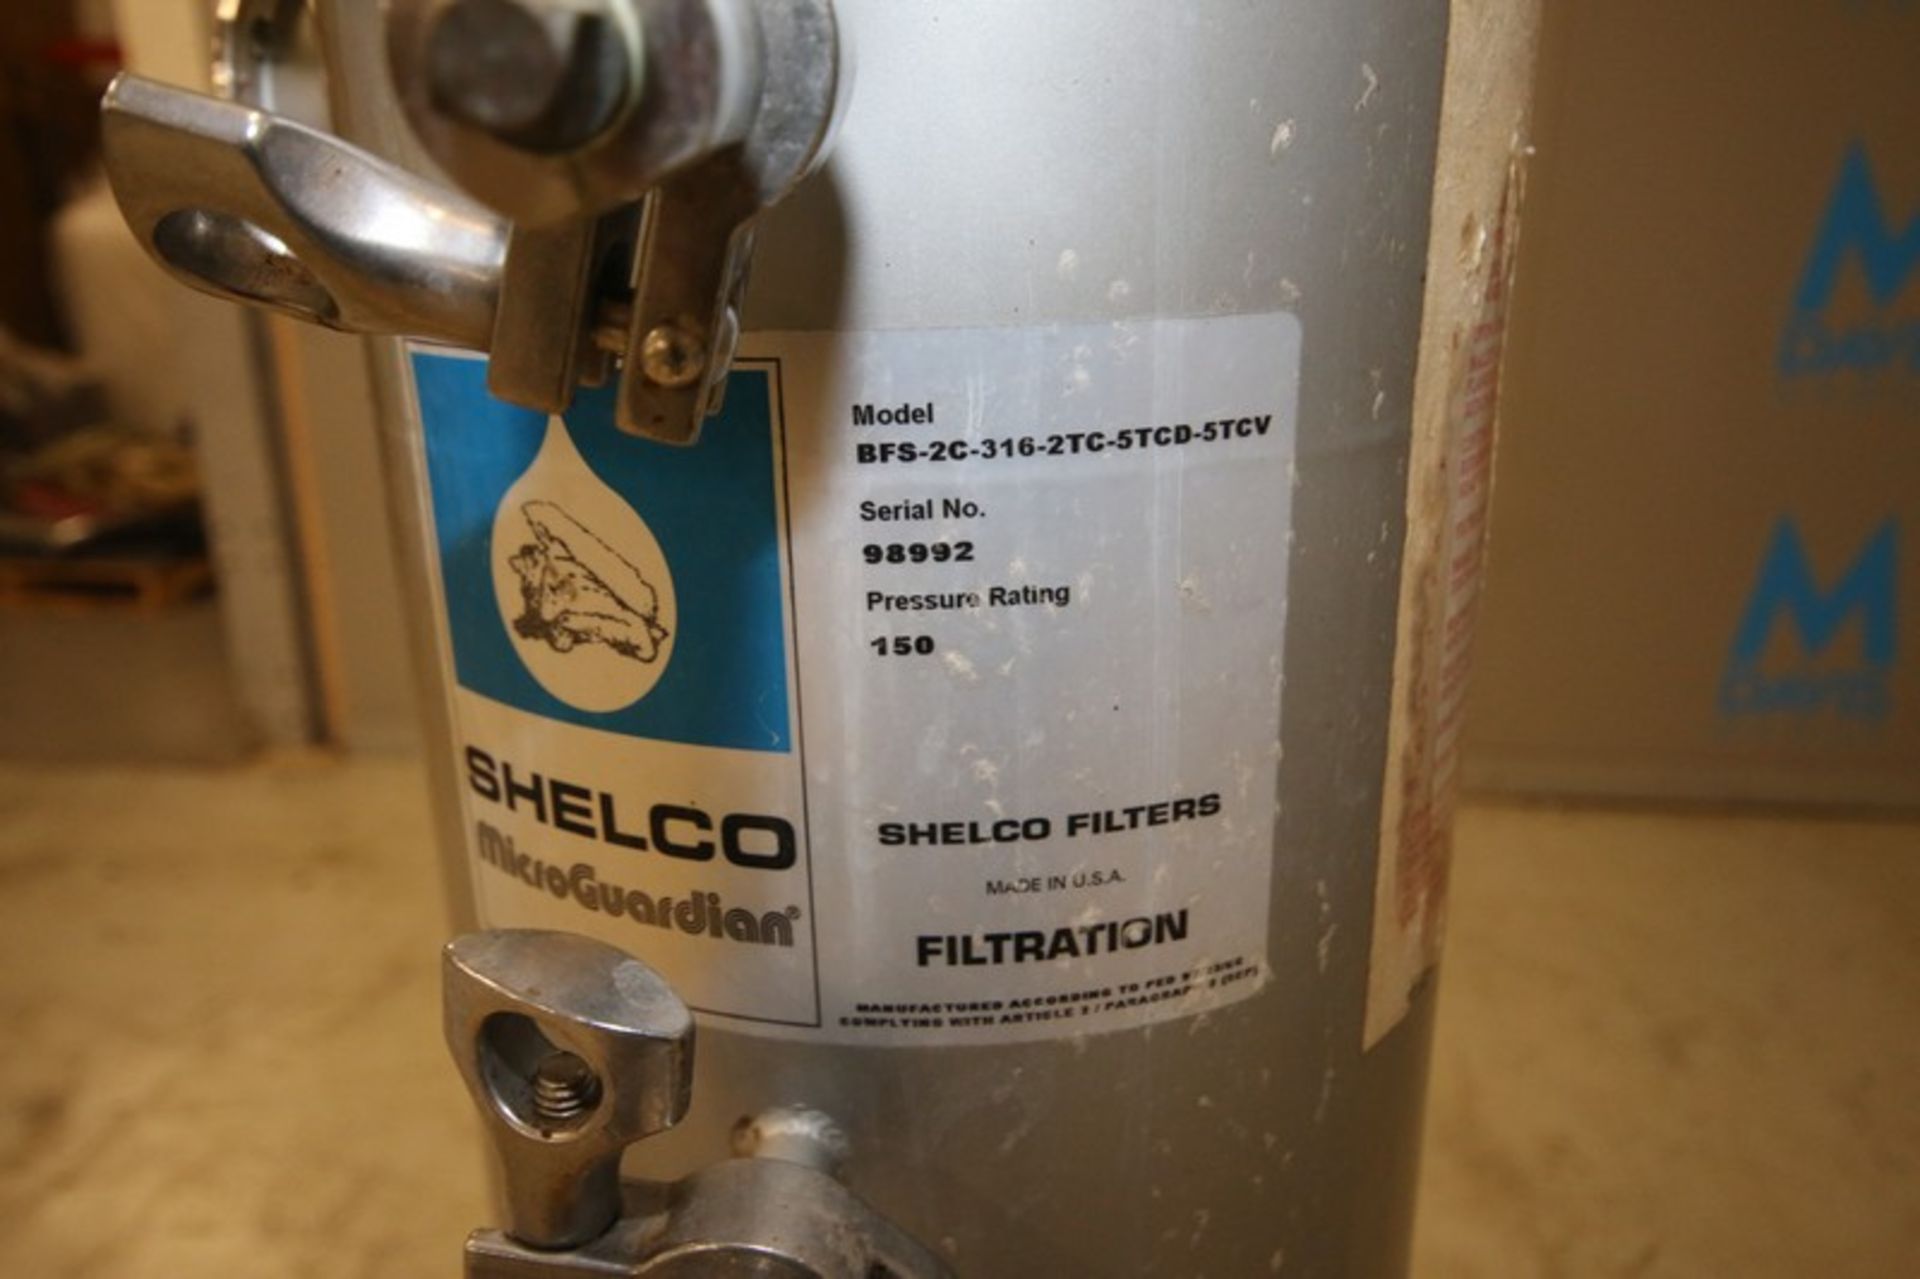 Shelco 40" H x 8" W In-Line Vertical S/S Filter, Model BFS-2C-316-2TC-5TCV, SN 98992, with 2" CT - Image 6 of 6